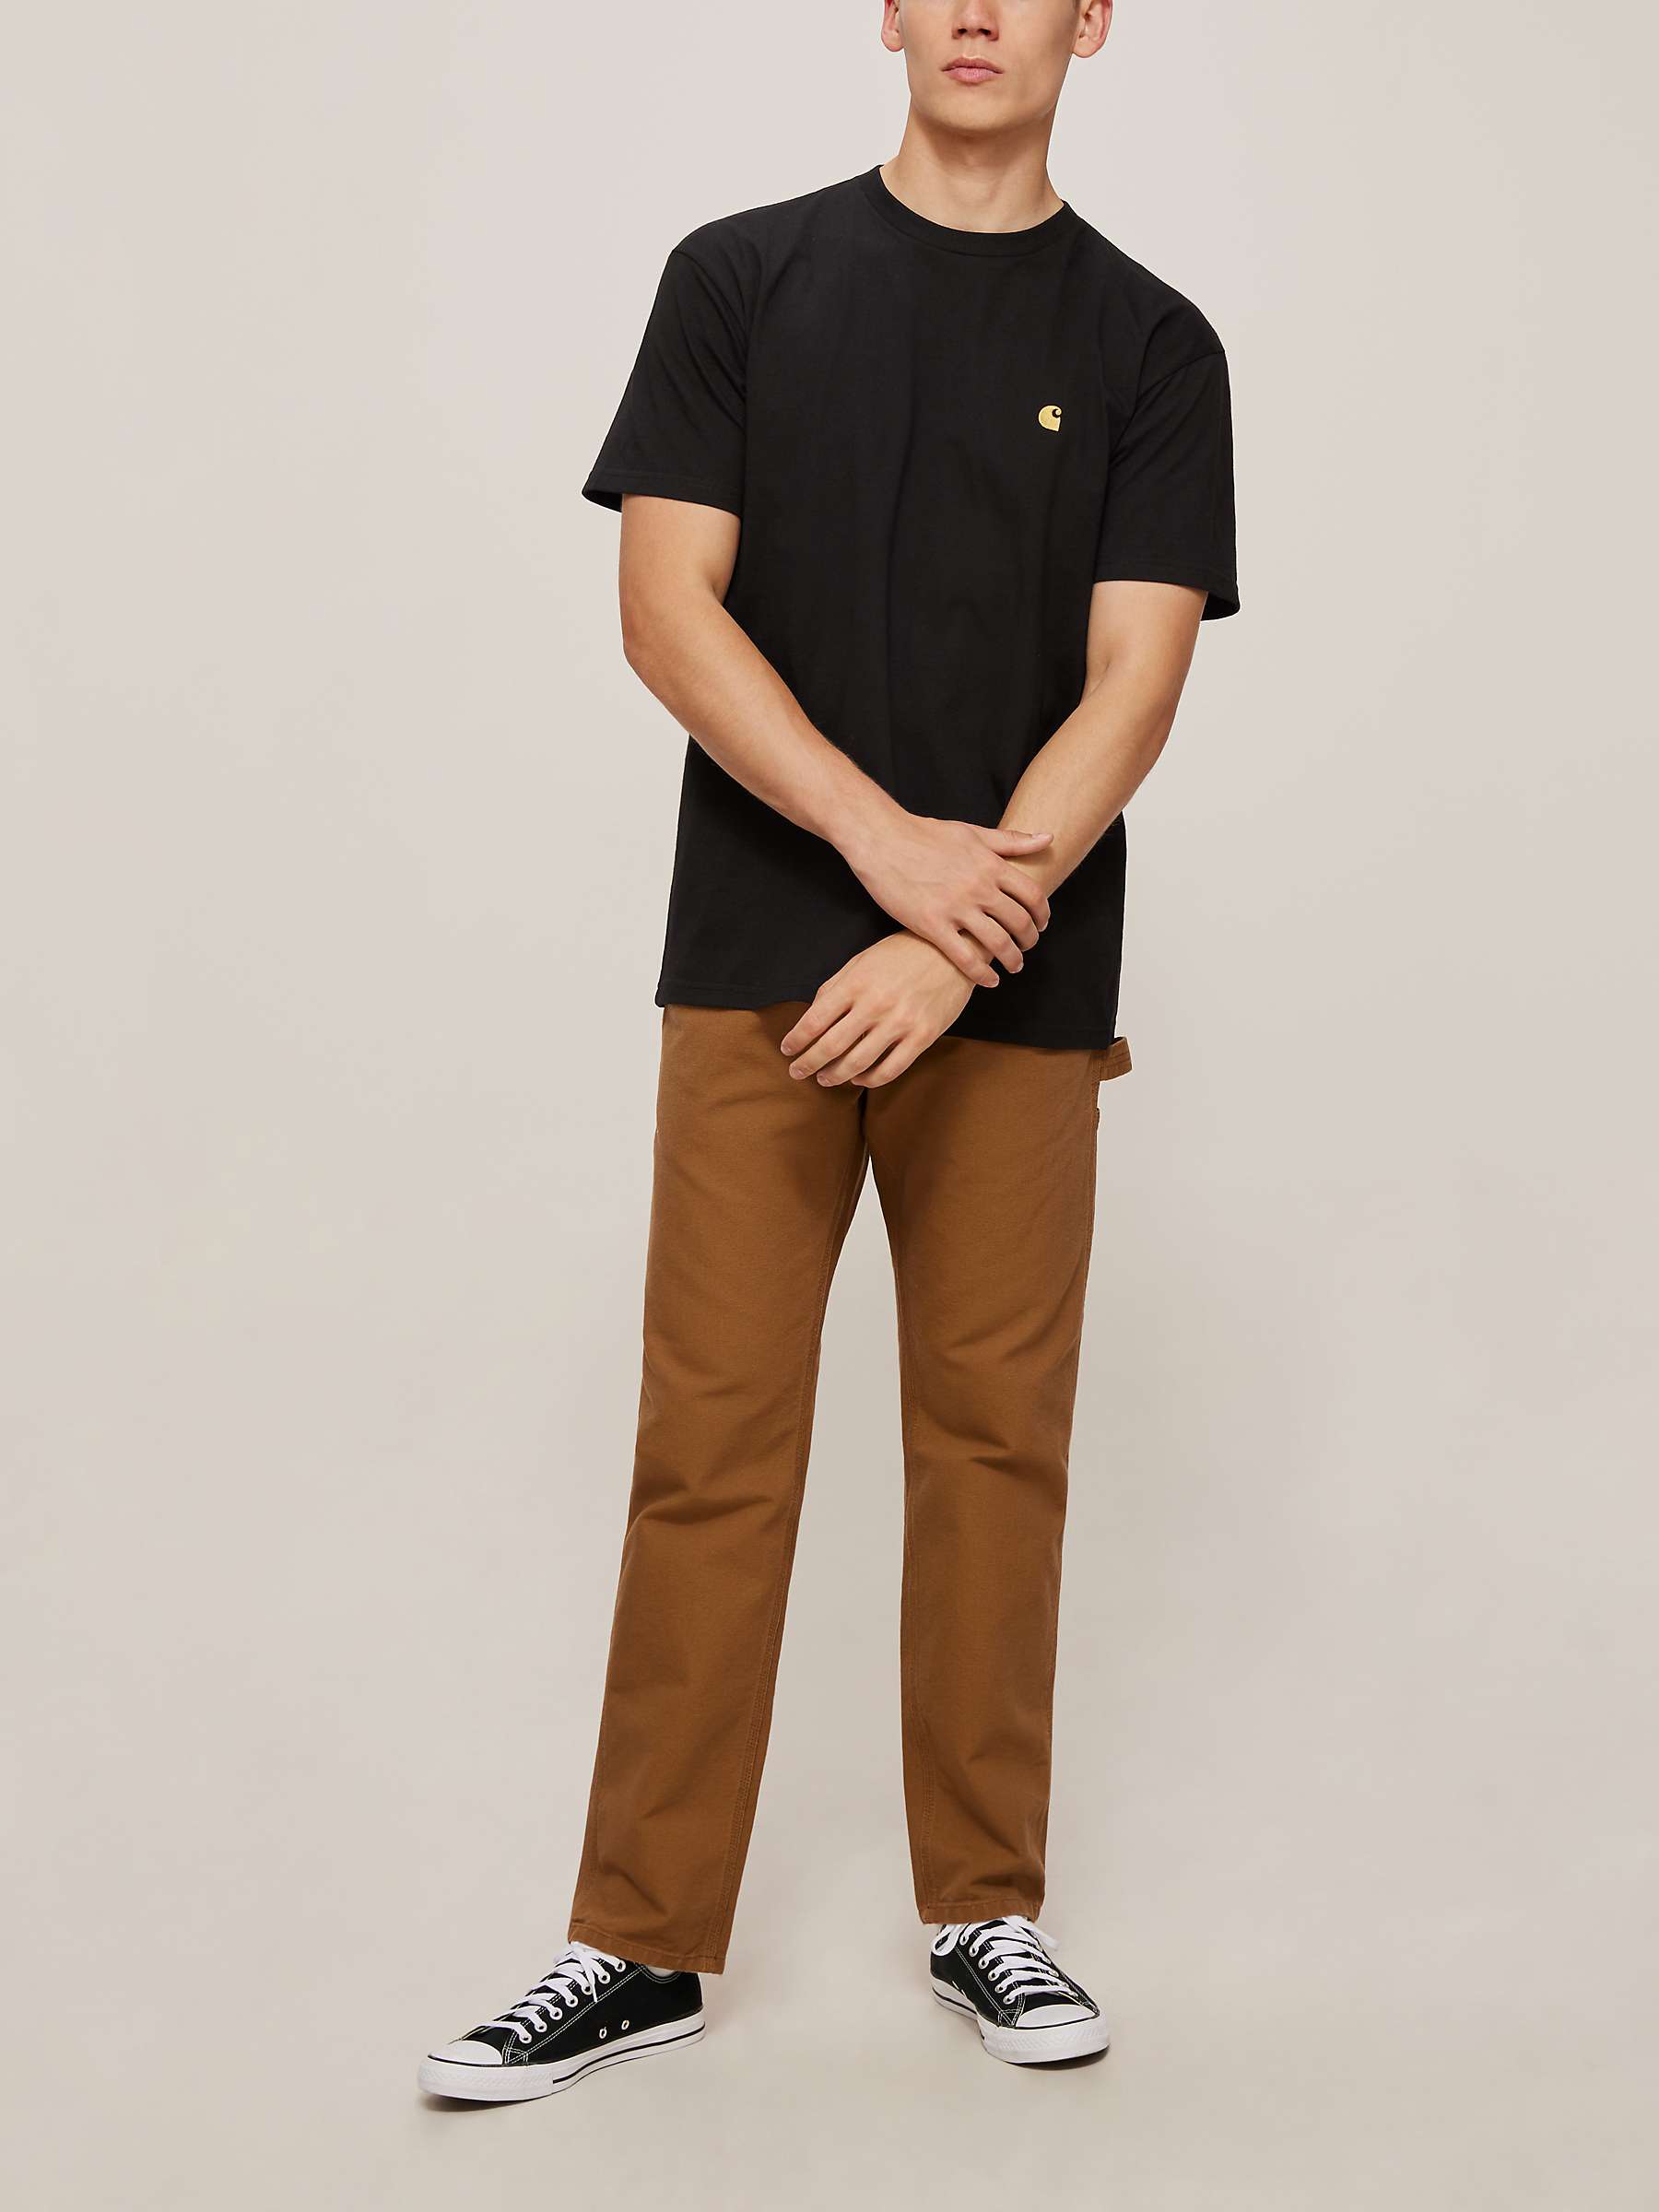 Buy Carhartt WIP Chase Short Sleeve T-Shirt Online at johnlewis.com